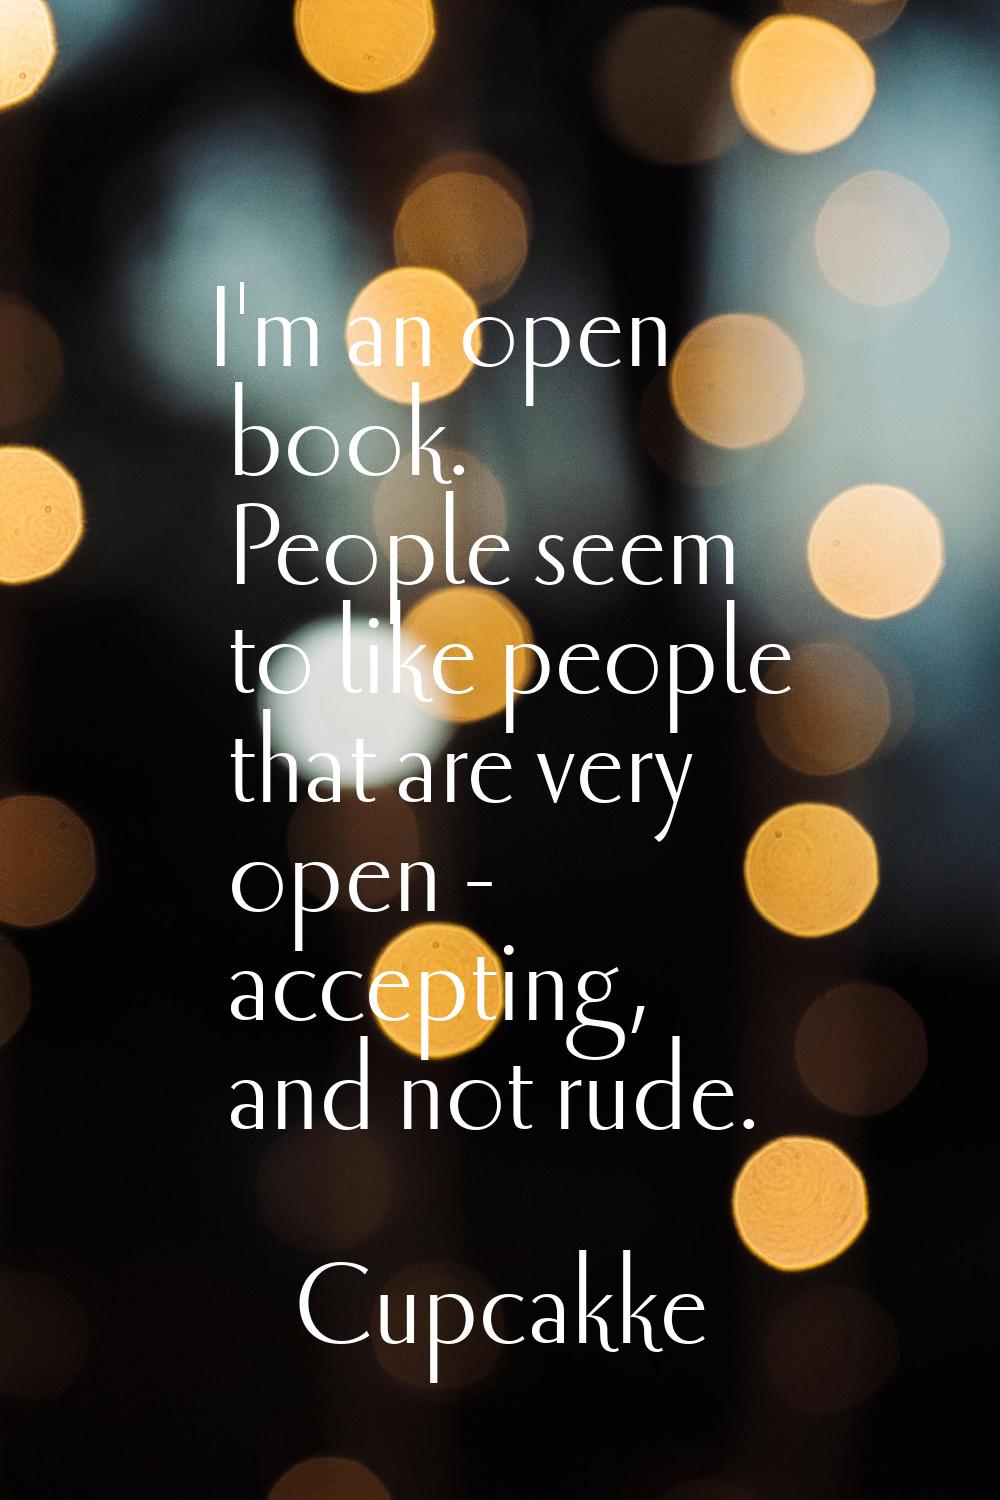 I'm an open book. People seem to like people that are very open - accepting, and not rude.